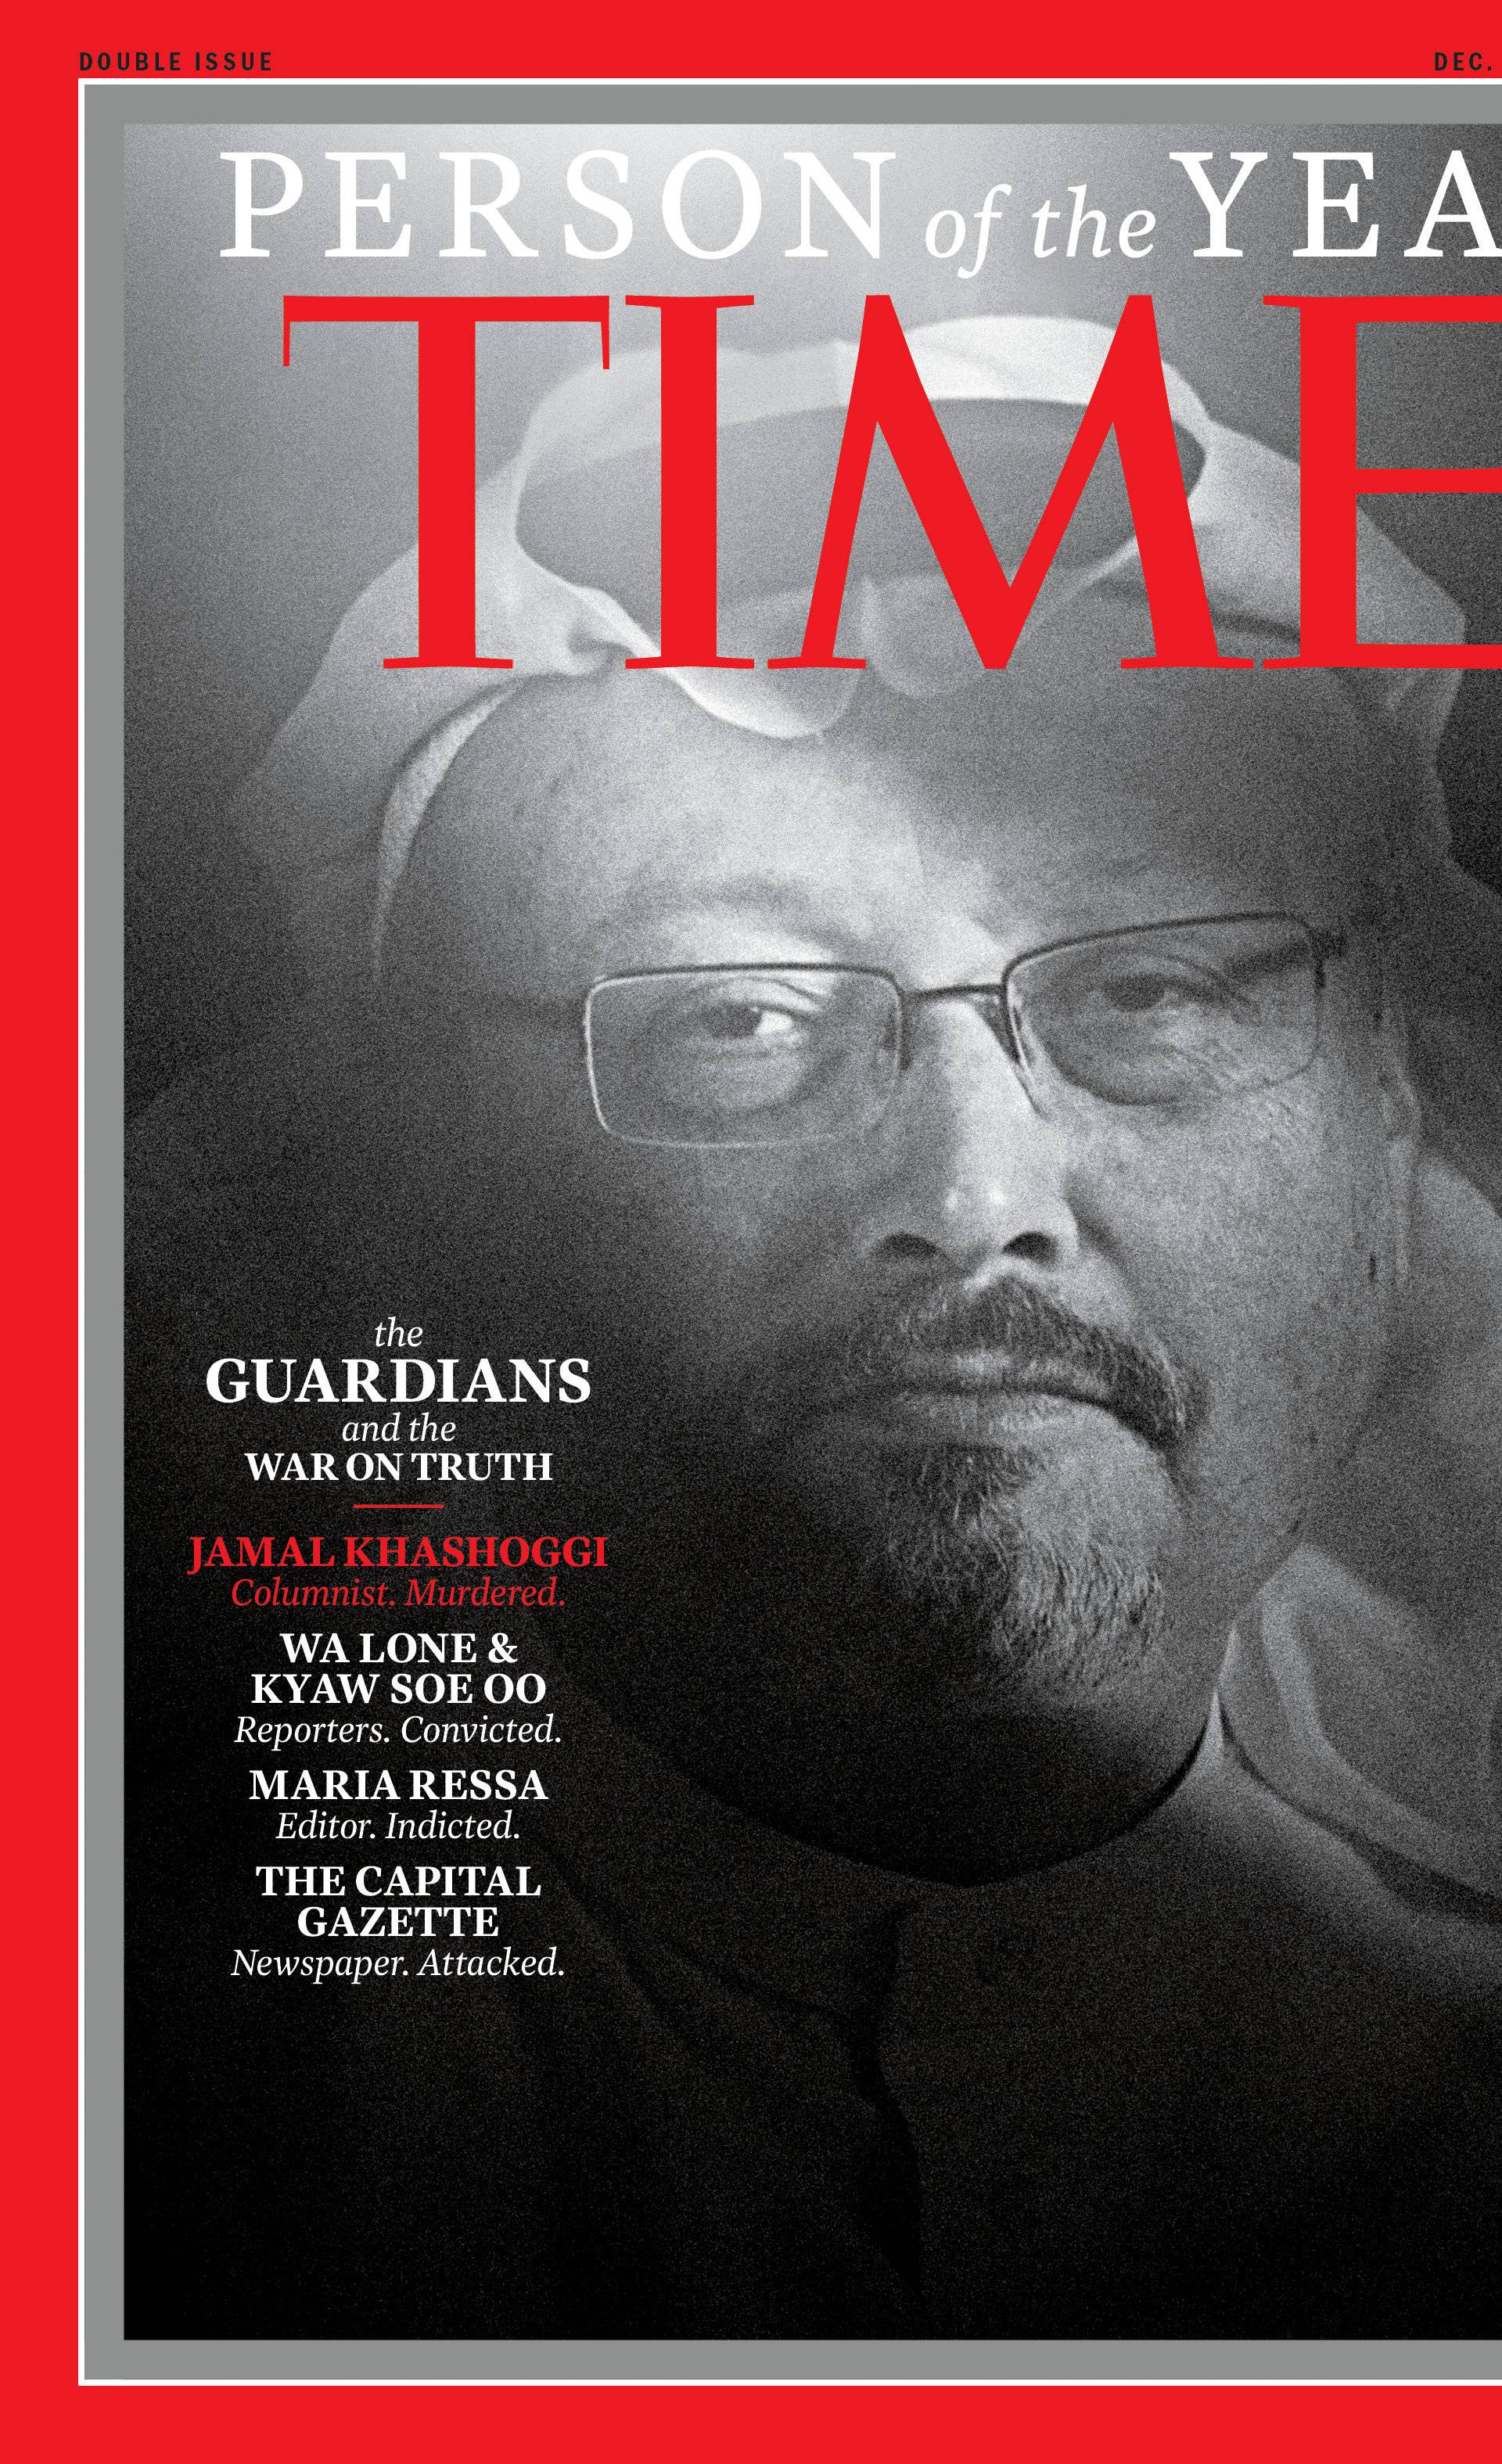 TIME's Person of the Year 2018 cover which named journalists, including a slain Saudi Arabian writer and a pair of Reuters journalists imprisoned by Myanmar's government, as its "Person of the Year